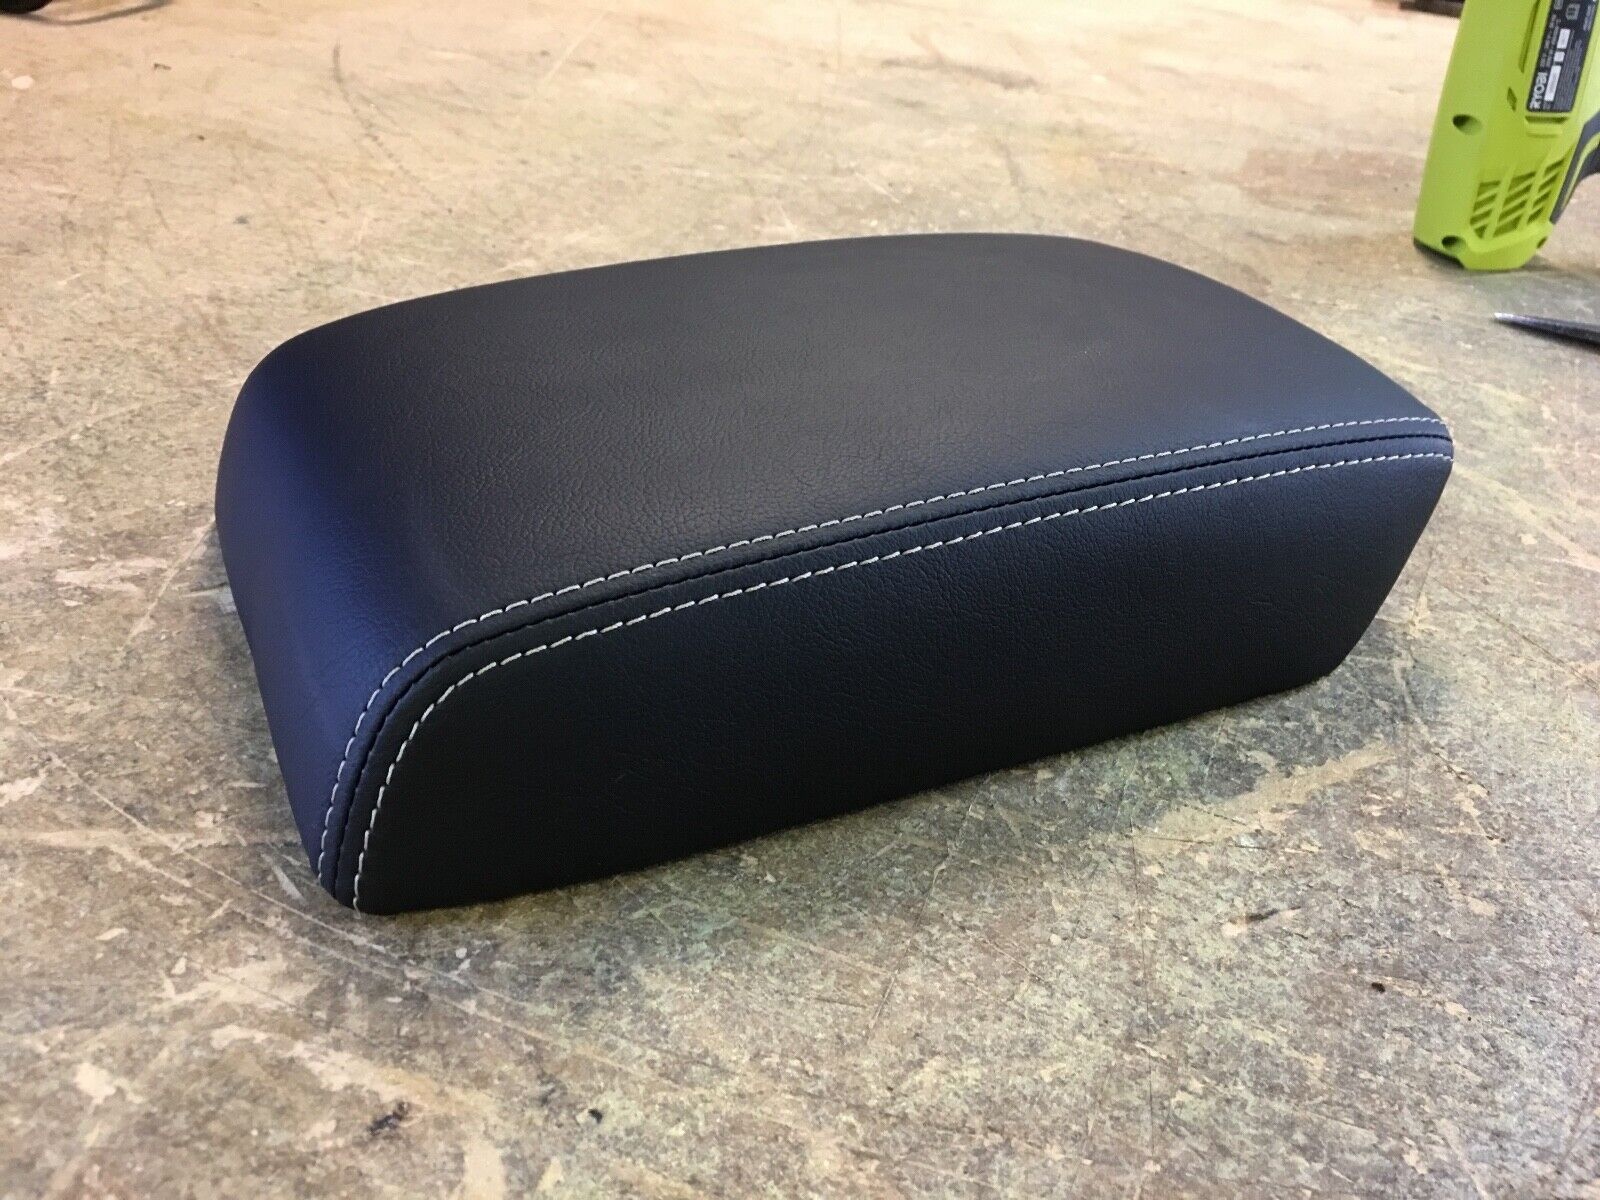 LEATHERETTE CONSOLE LID ARM REST COVER FOR FORD RANGER RAPTOR FX4 XLT GREY